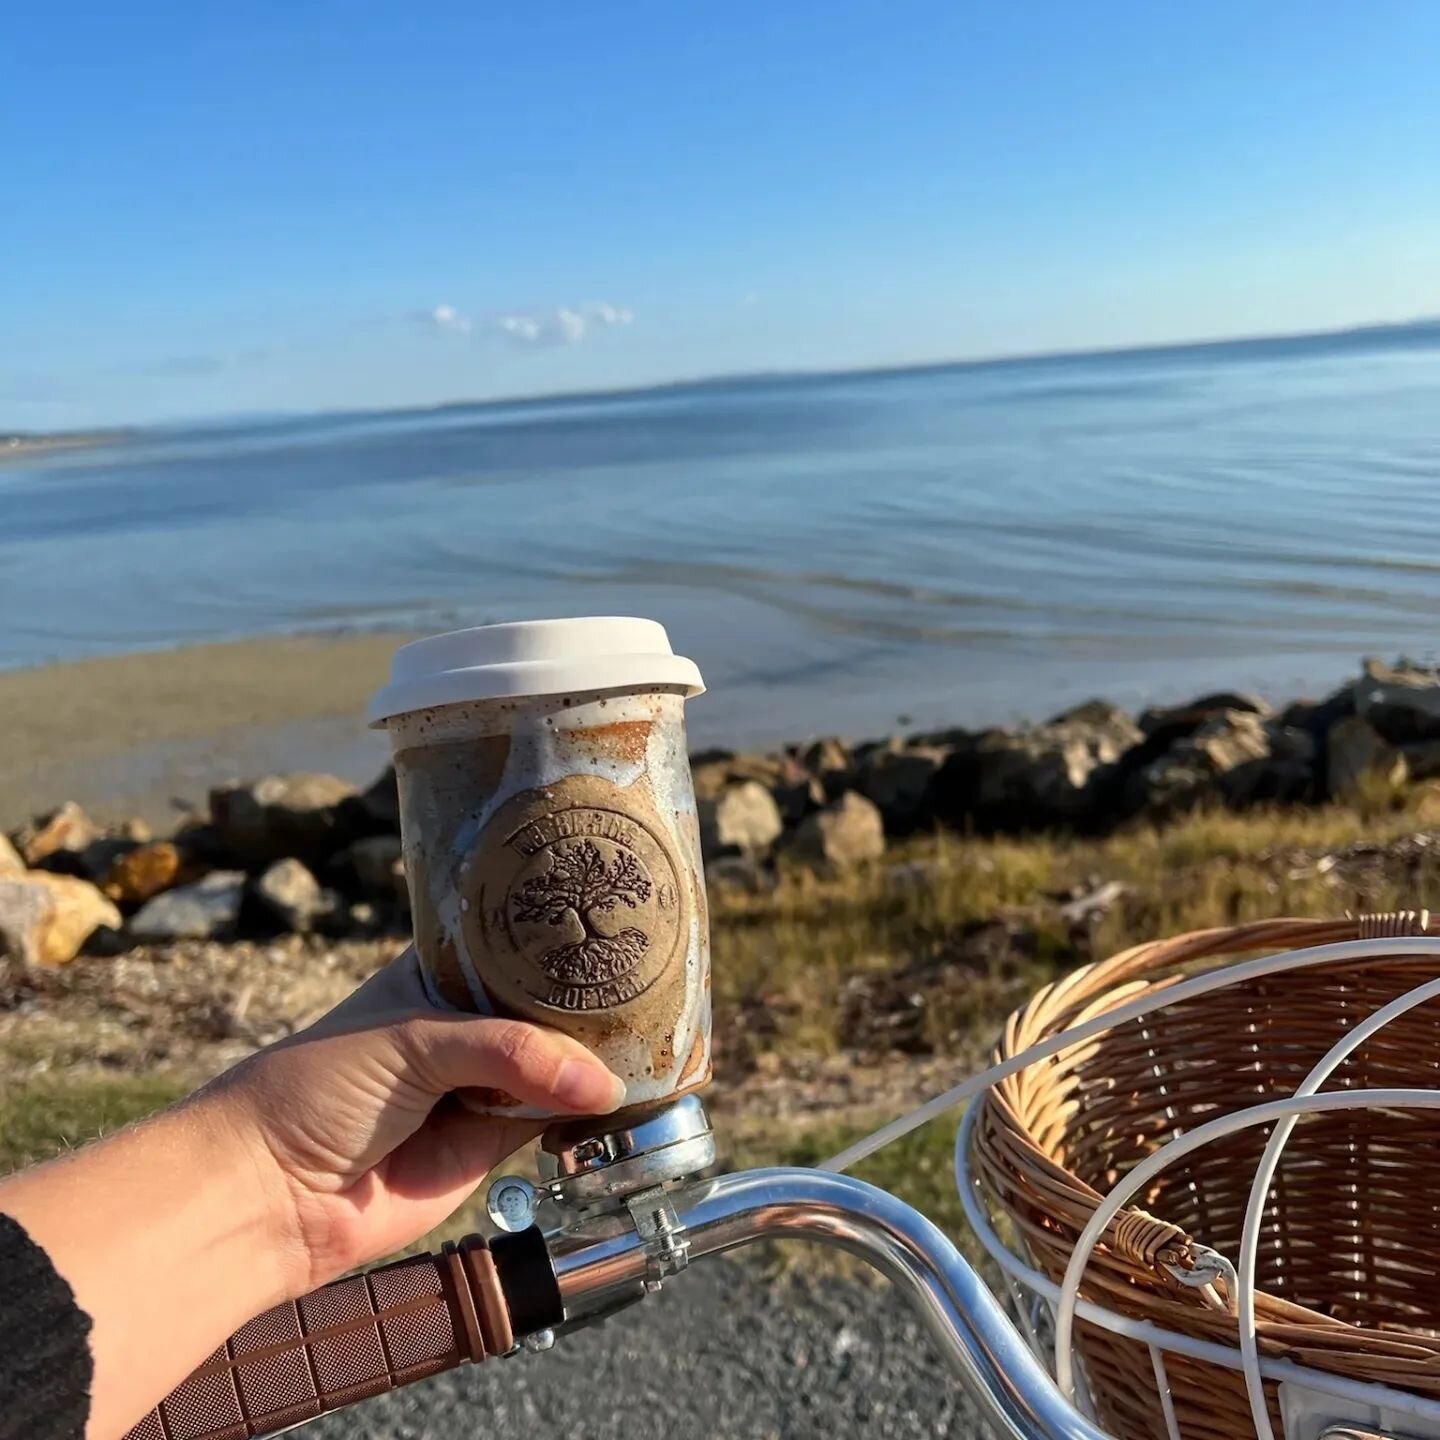 Good Morning Minjerribah! 🏝 ☕️ 

Today is the day for the annual Straddie Salute triathlon 🏃&zwj;♀️ 🚲 🏊&zwj;♂️ 

Make sure you swing by us this morning to get that extra boost before the big event! Nothing wrong with a little advantage over the l